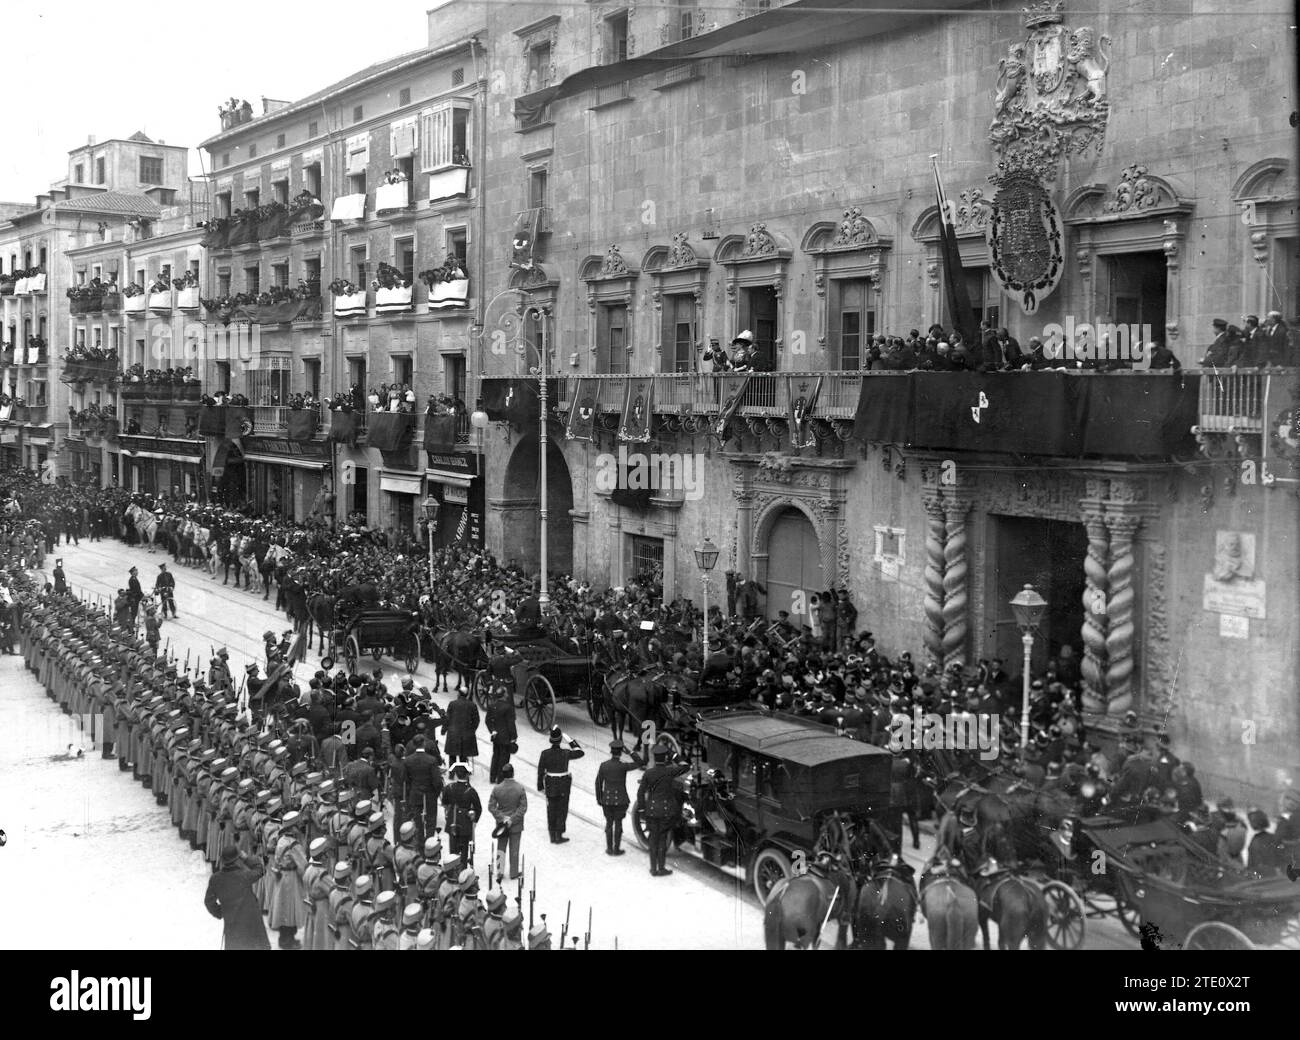 02/29/1912. Monarchist Demonstration in Alicante. Ss.Mm. Looking out on the balcony of the City Hall, Responding to the Acclamations. Credit: Album / Archivo ABC / Cantos Stock Photo